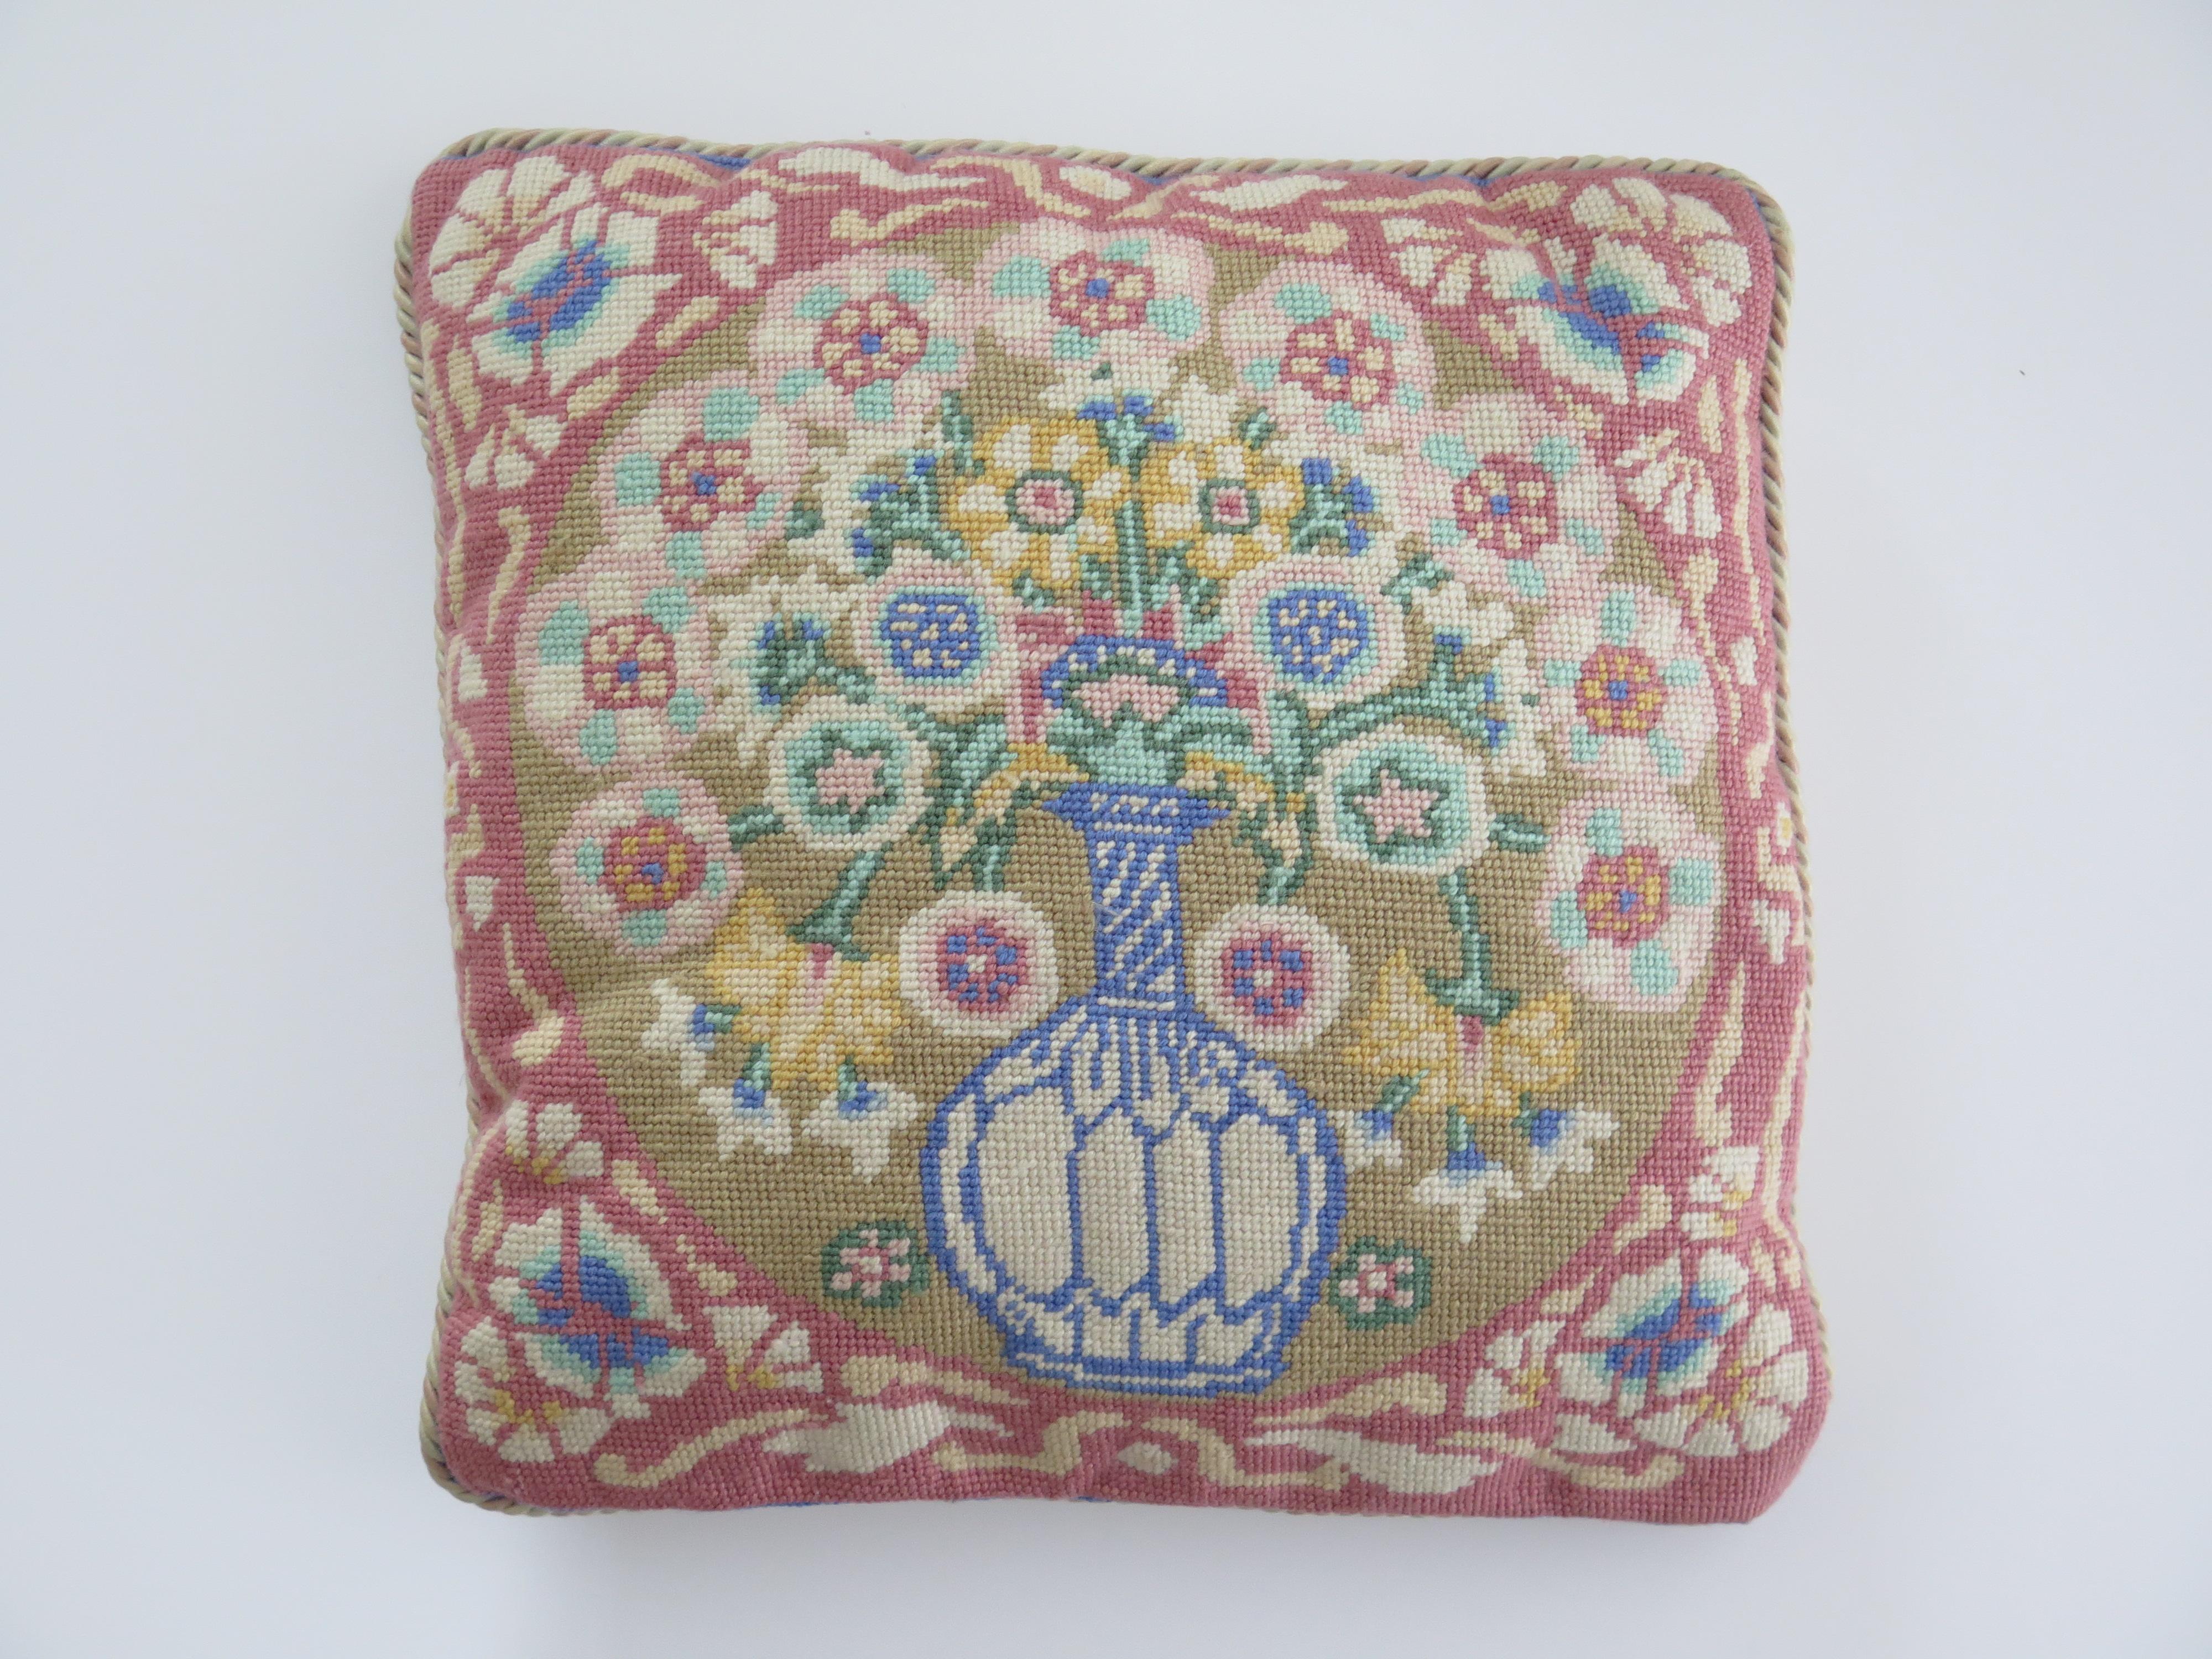 Country Woven Cushion or Pillow with Flower Vase pattern in pastel shades, Circa 1930s For Sale